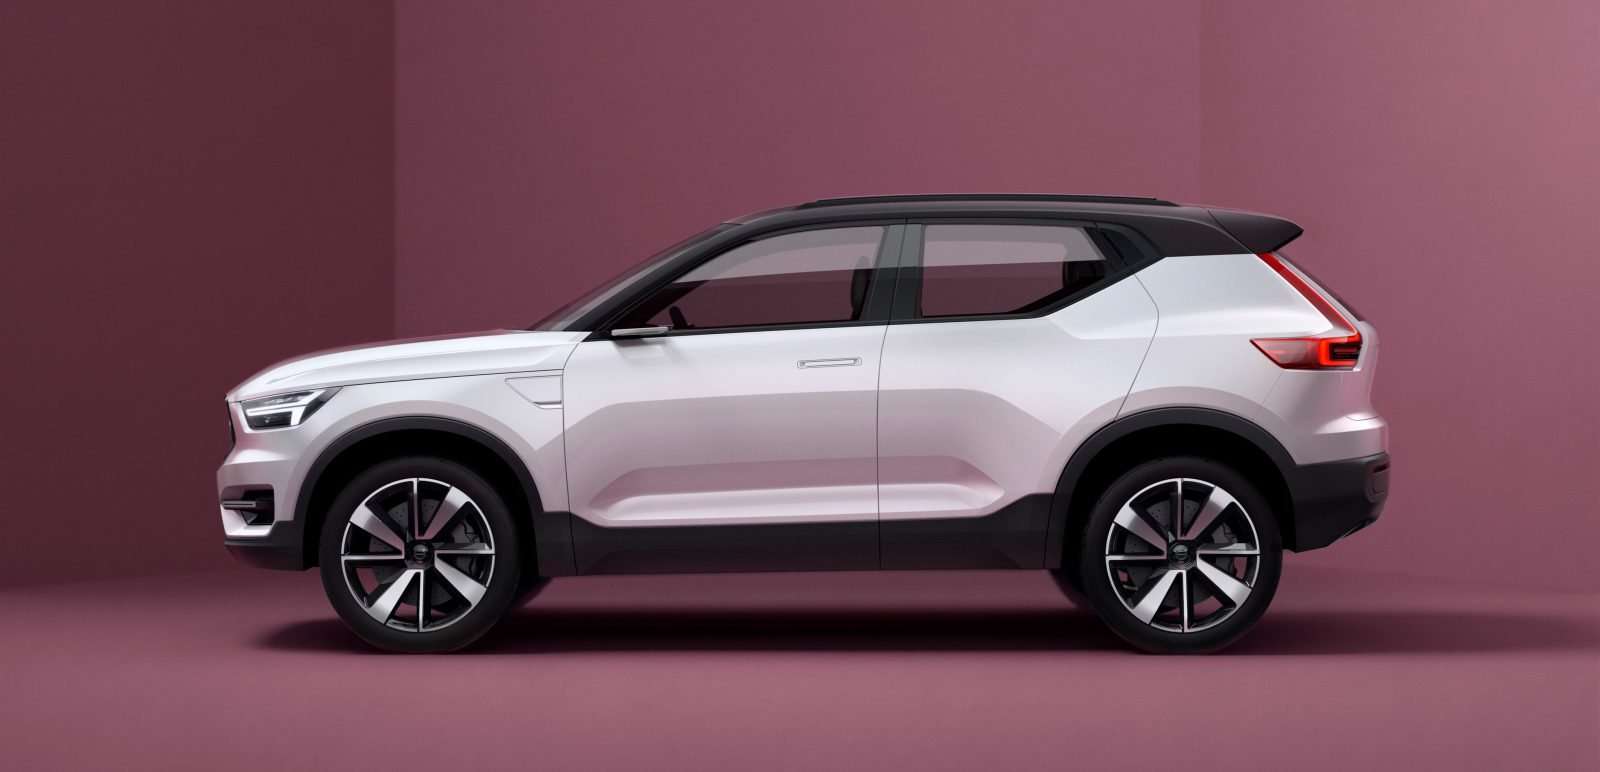 image for Volvo credits Tesla for creating EV demand, says they will stop developing diesel engines to focus on EVs